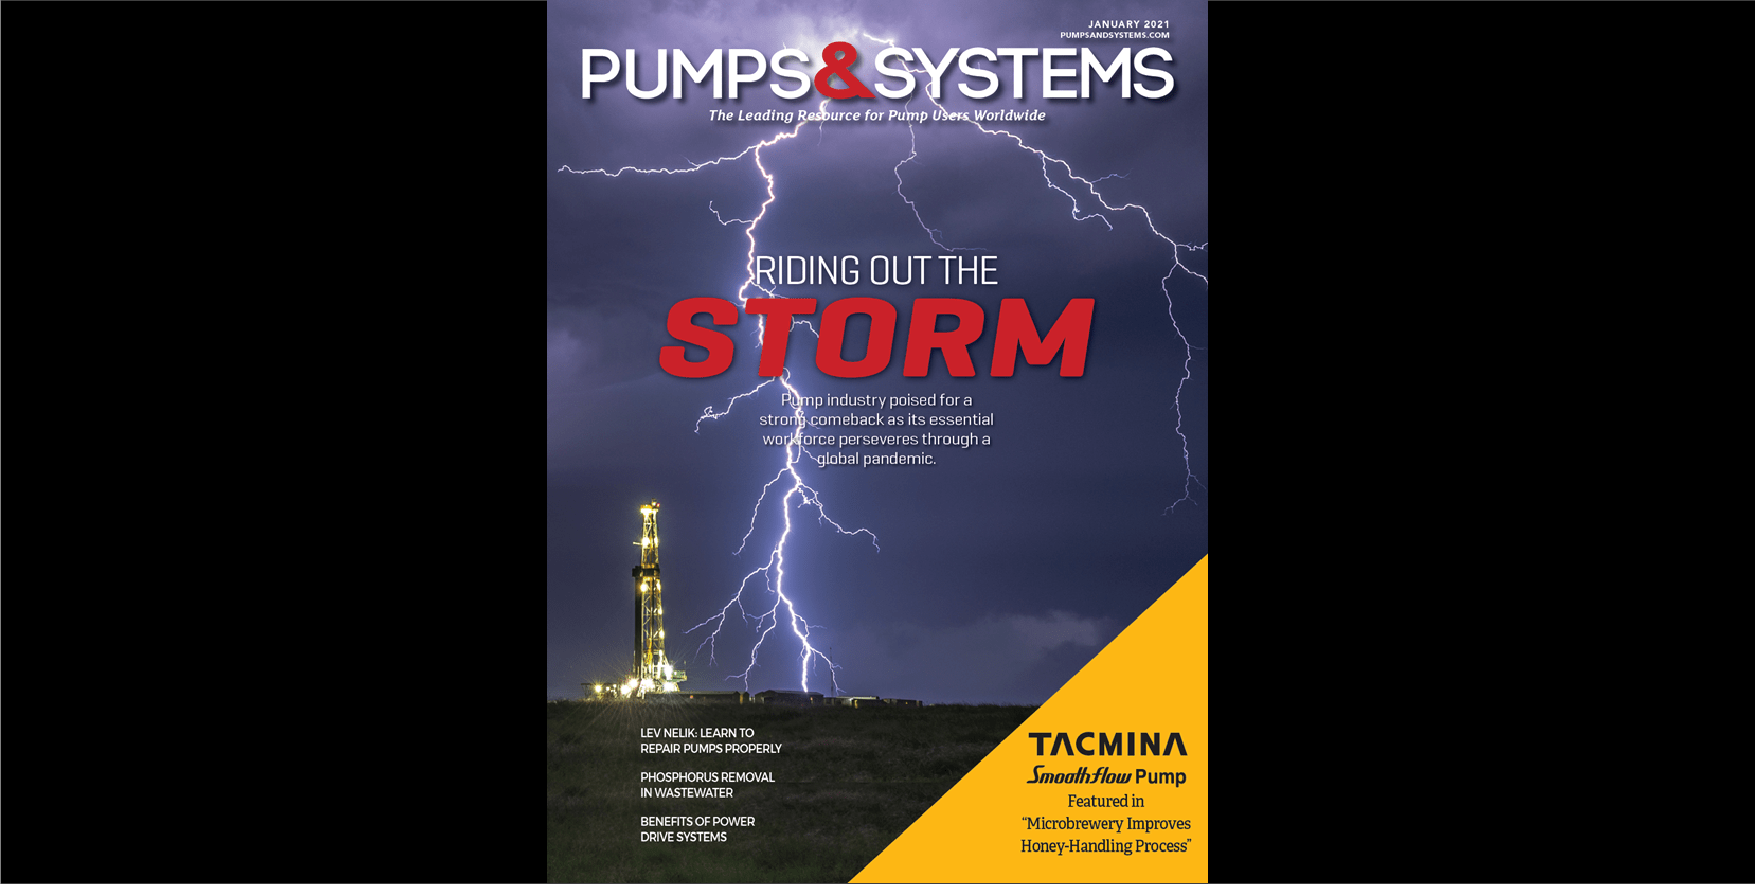 Tacmina featured in Pumps & Systems magazine for microbrewery honey handling process